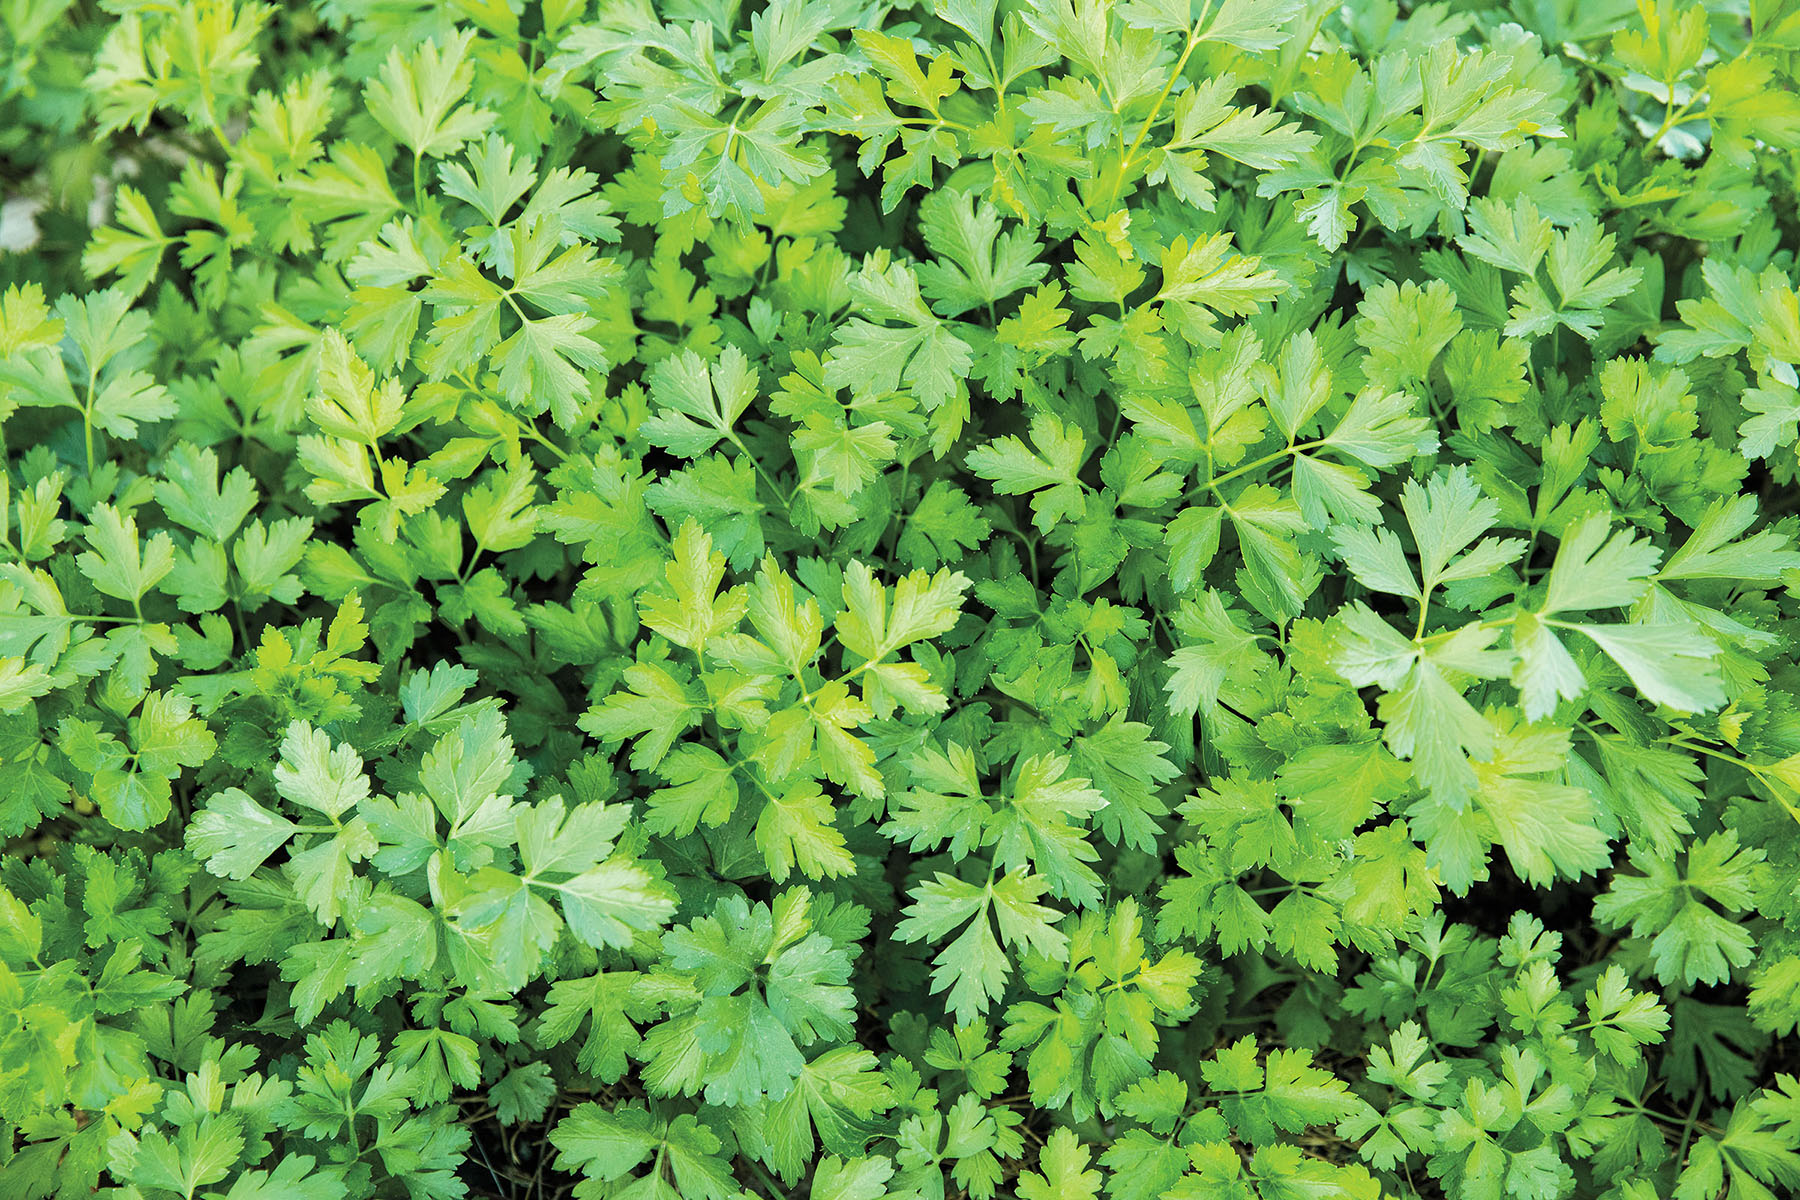 An overhead view of parsley growing in a field